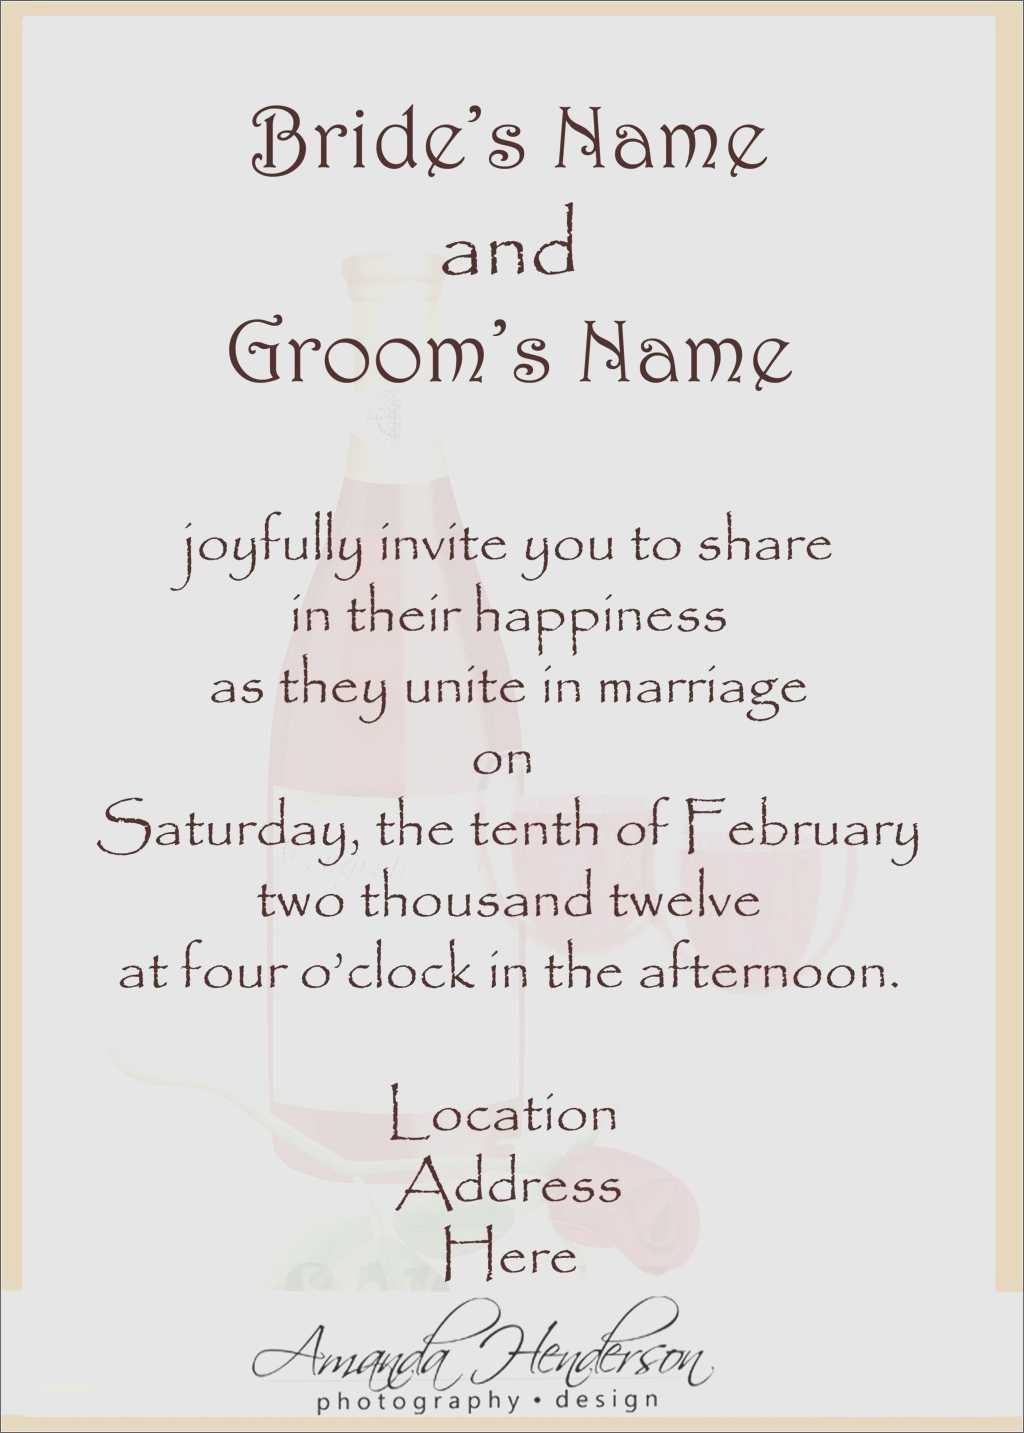 Wedding Invitation Wording From Bride And Groom
 New Wedding Invitations Samples Wording From Bride and